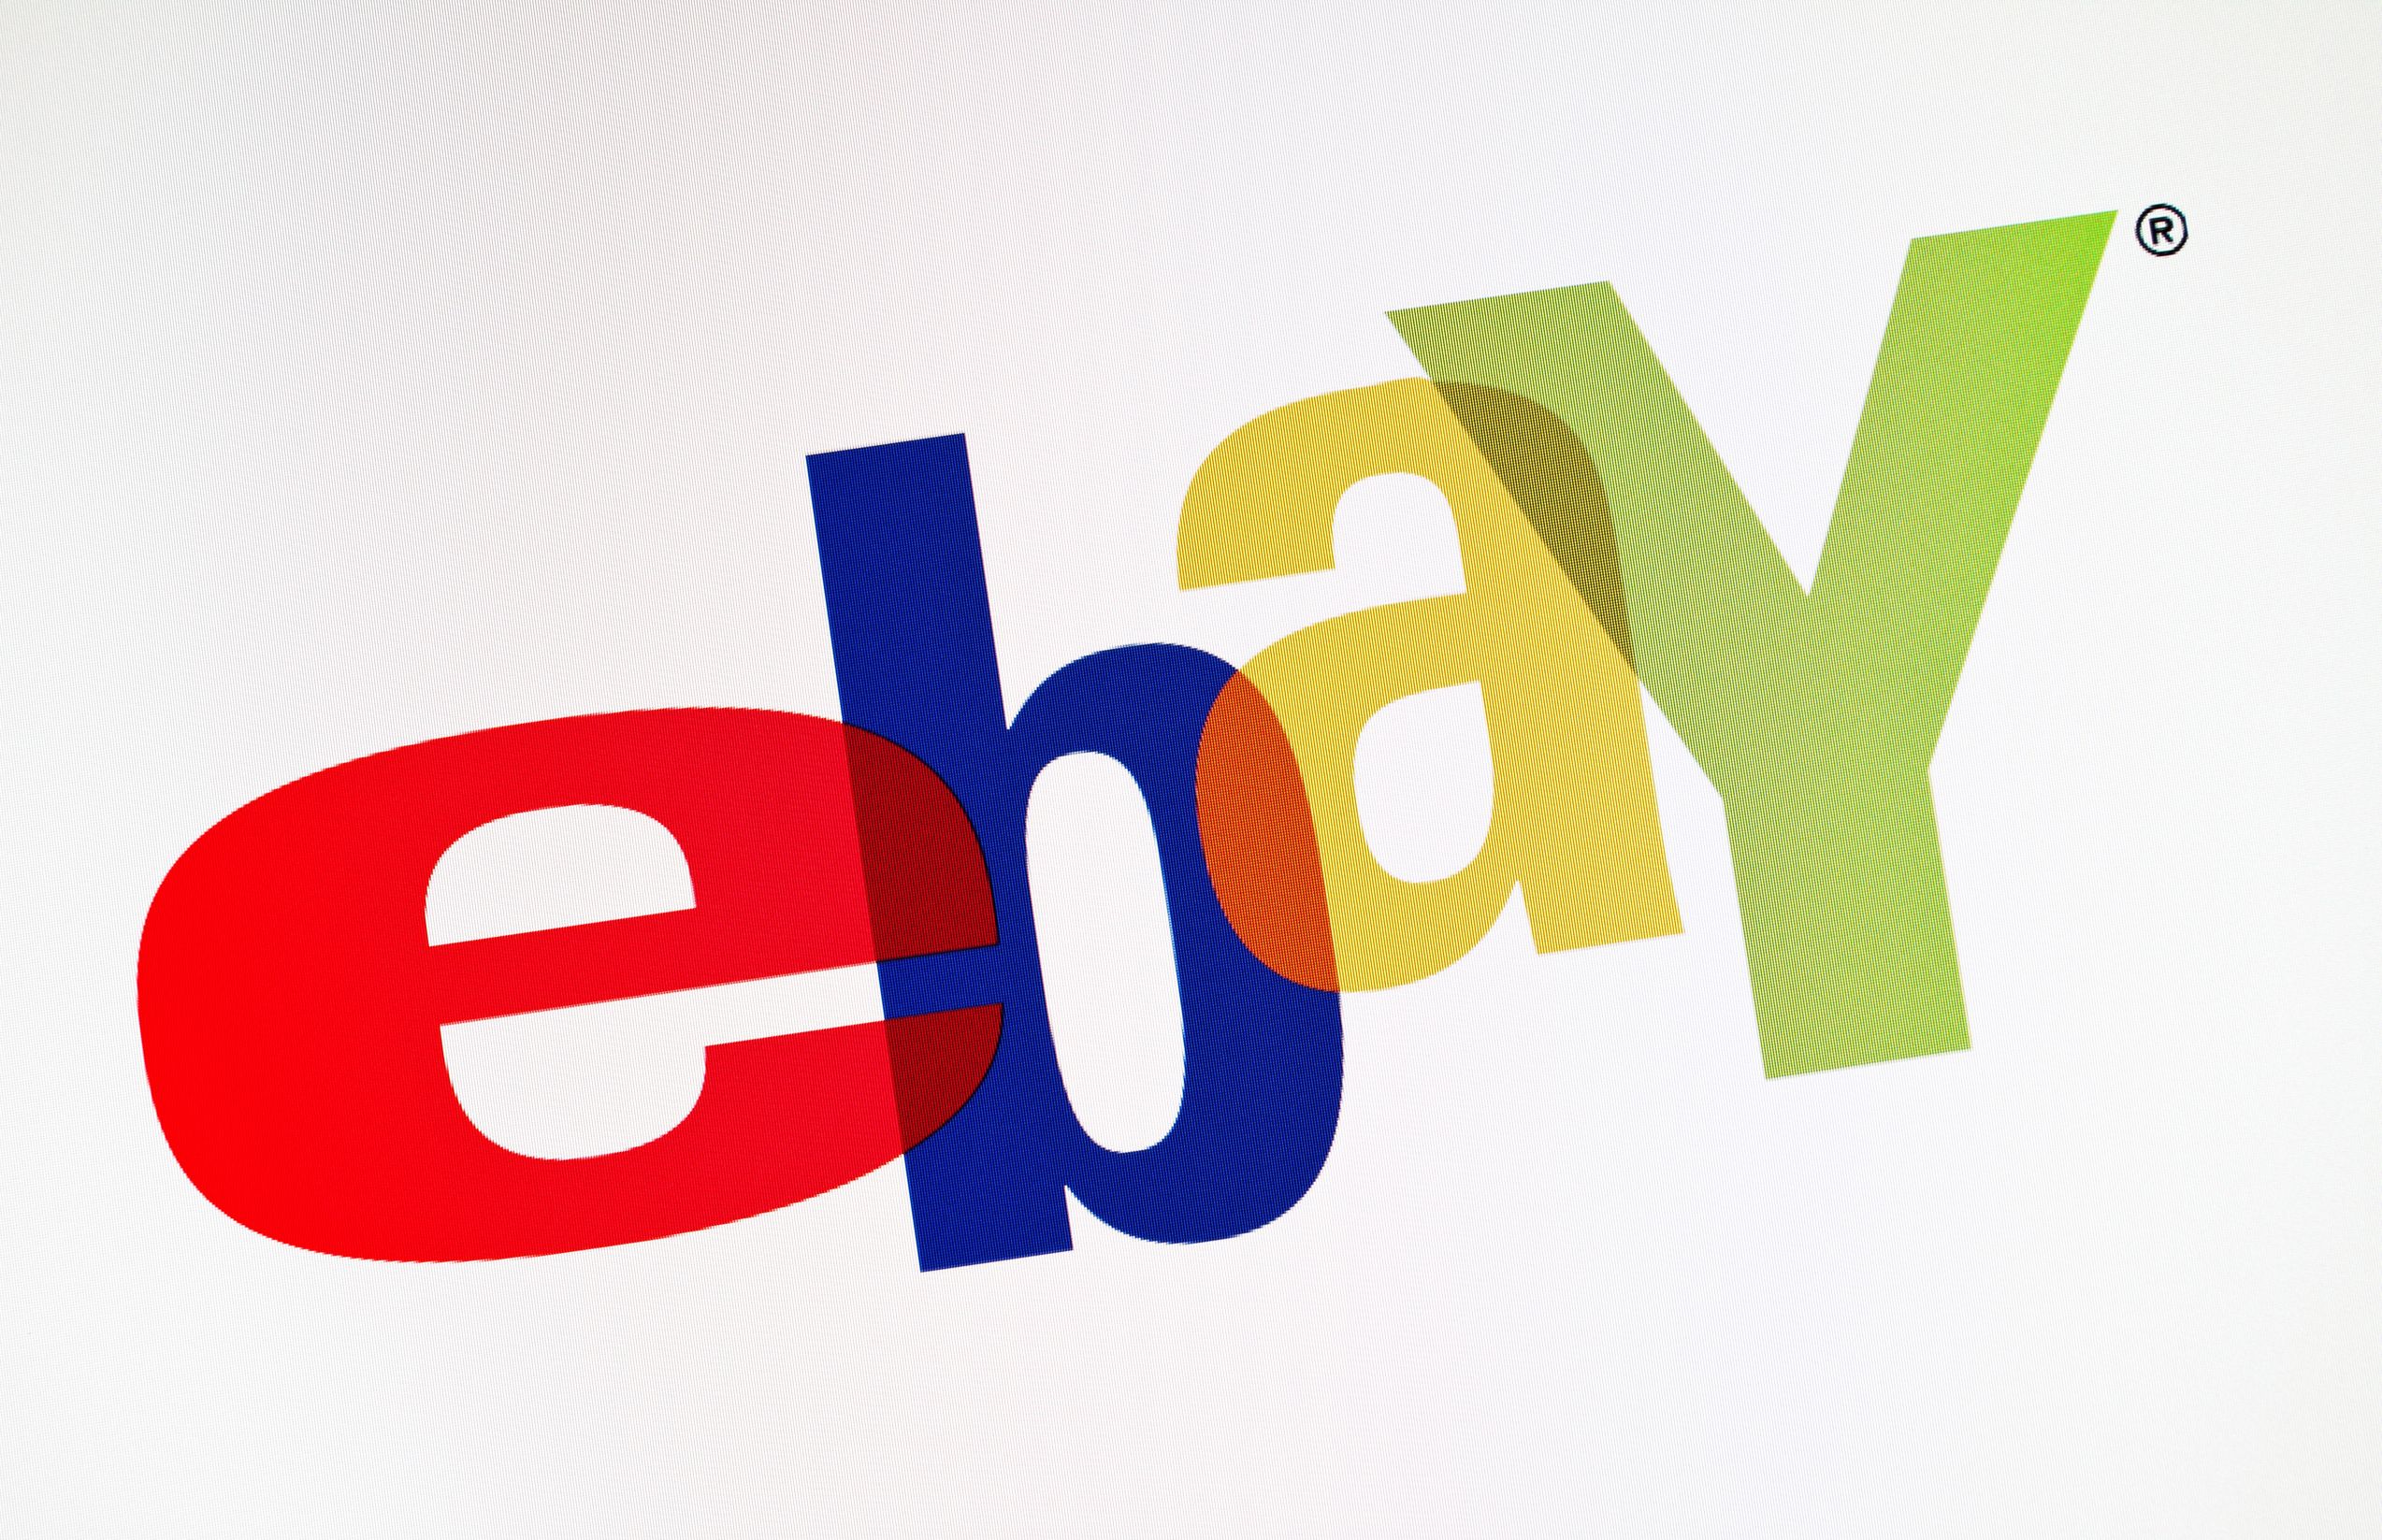 Select American SPCC as your charity when selling on ebay